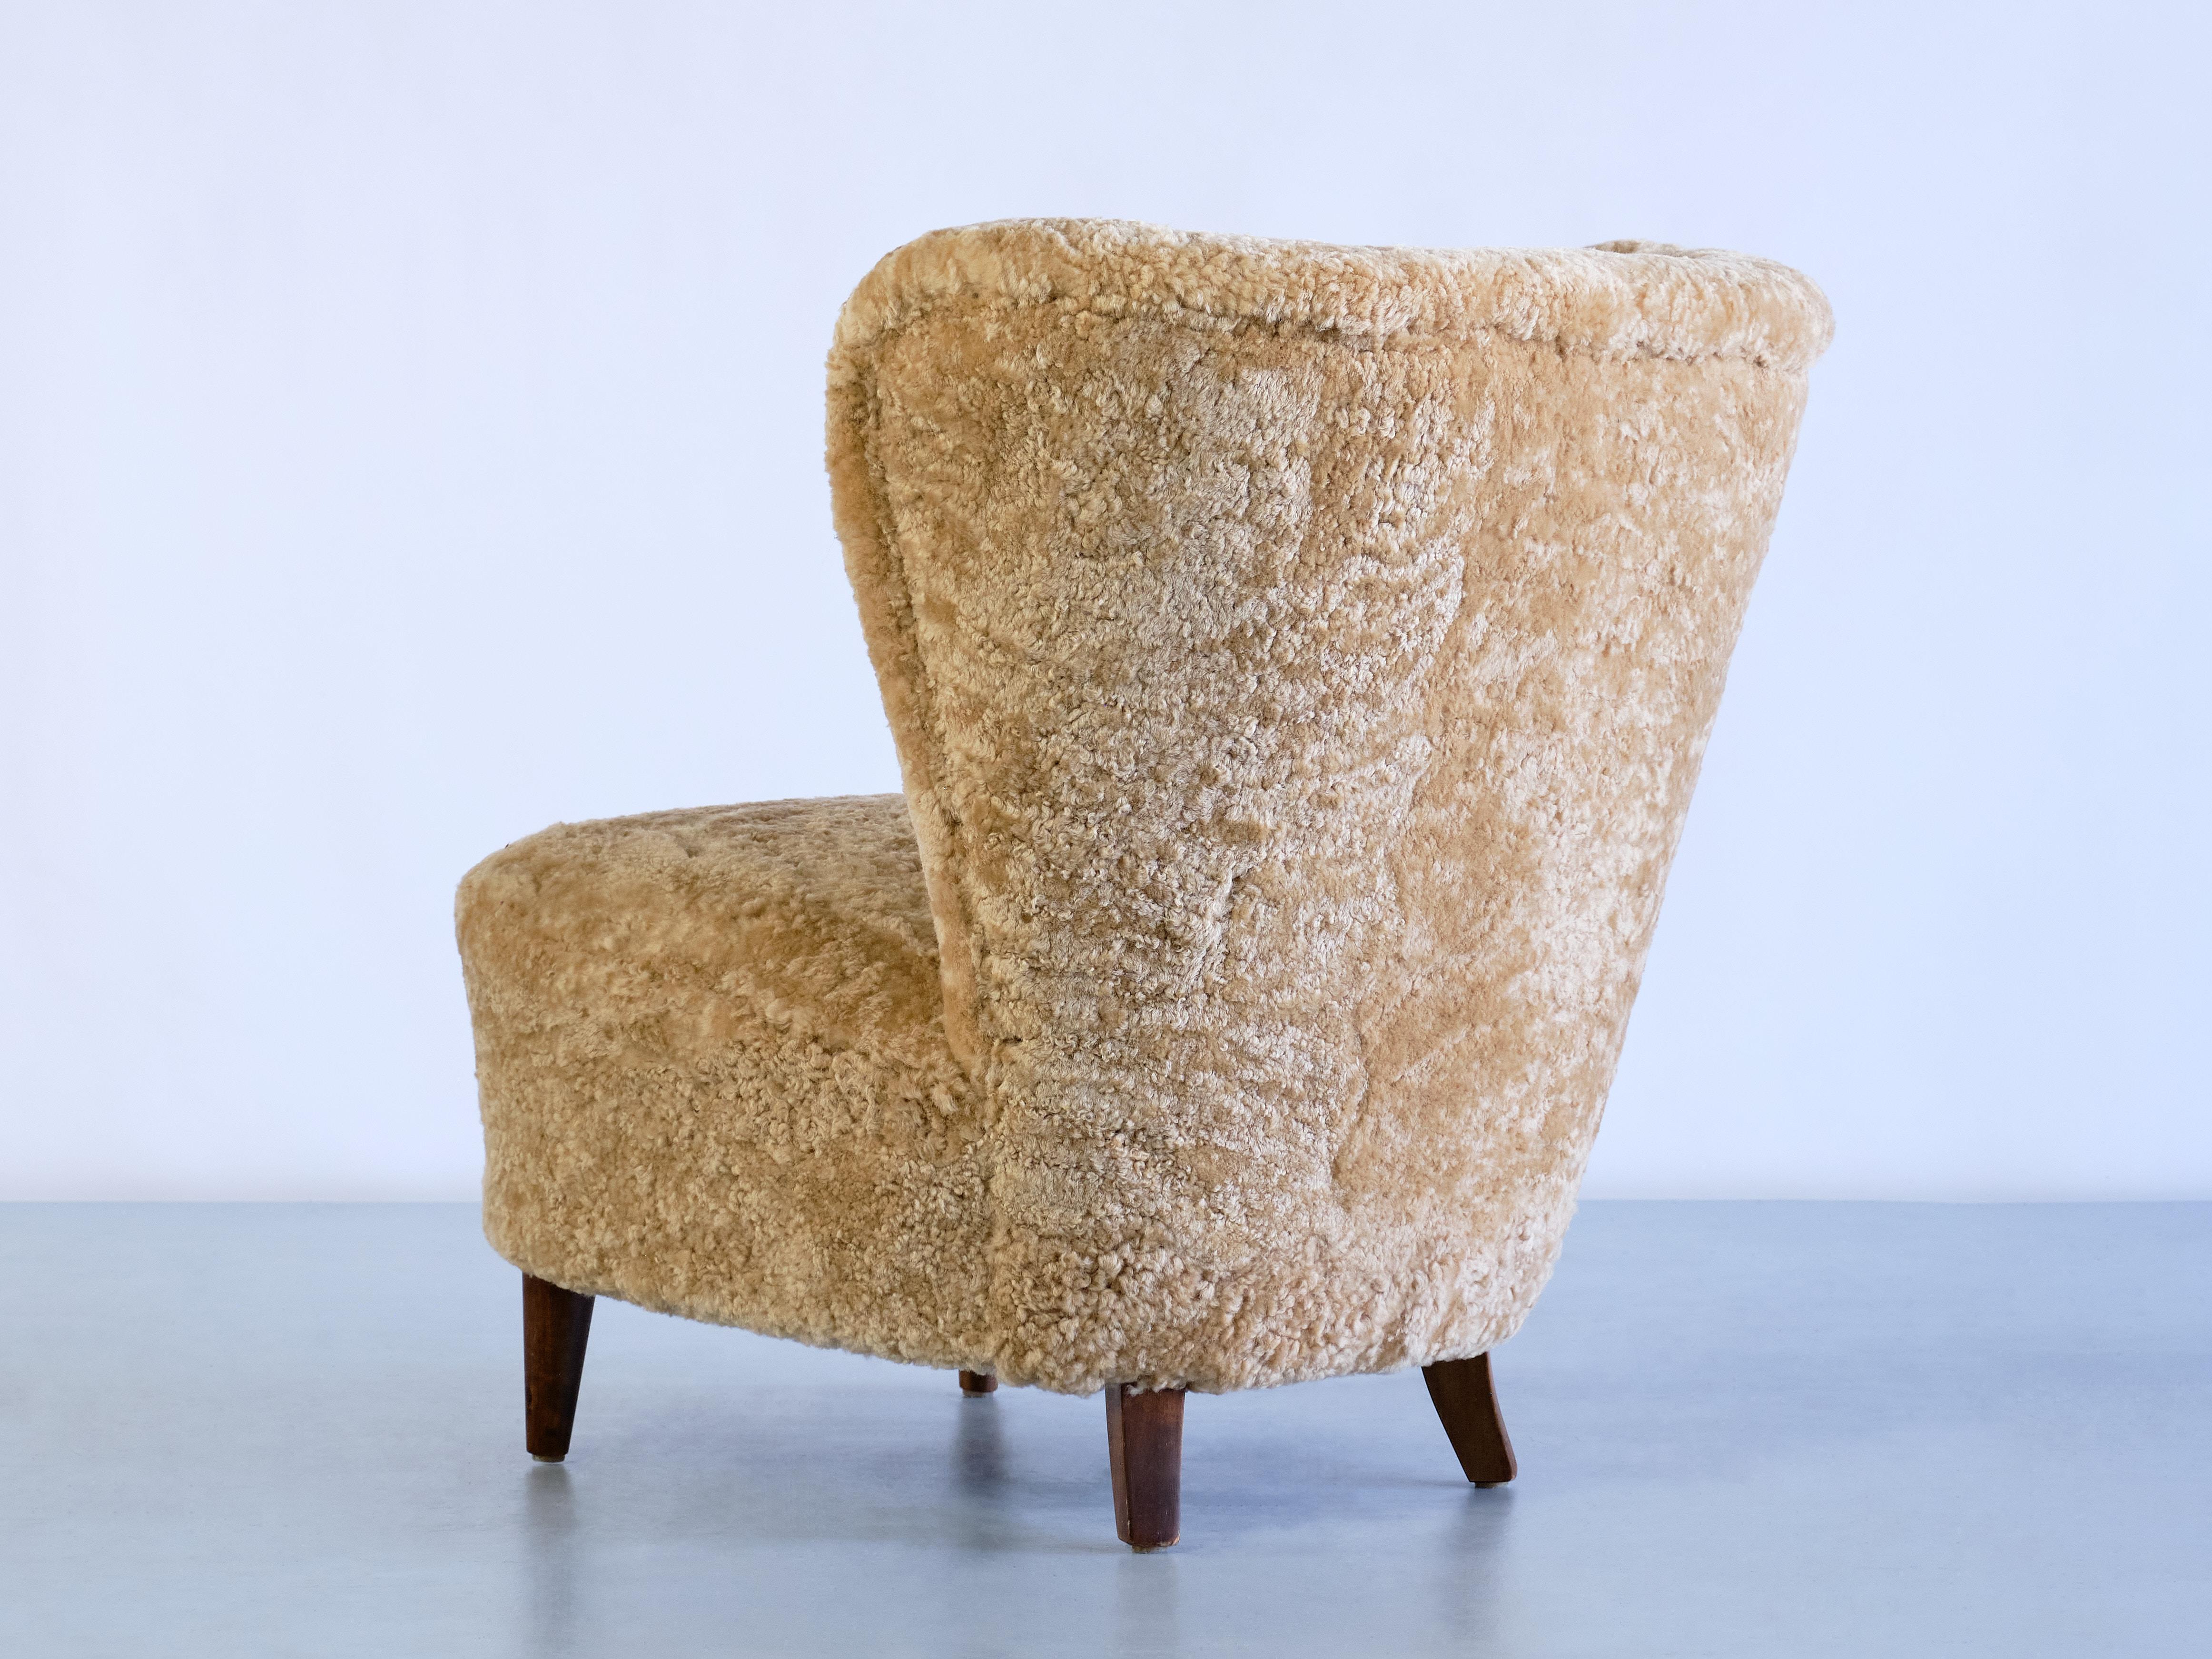 Pair of Johannes Brynte Lounge Chairs in Sheepskin and Ash Wood, Sweden, 1940s For Sale 6